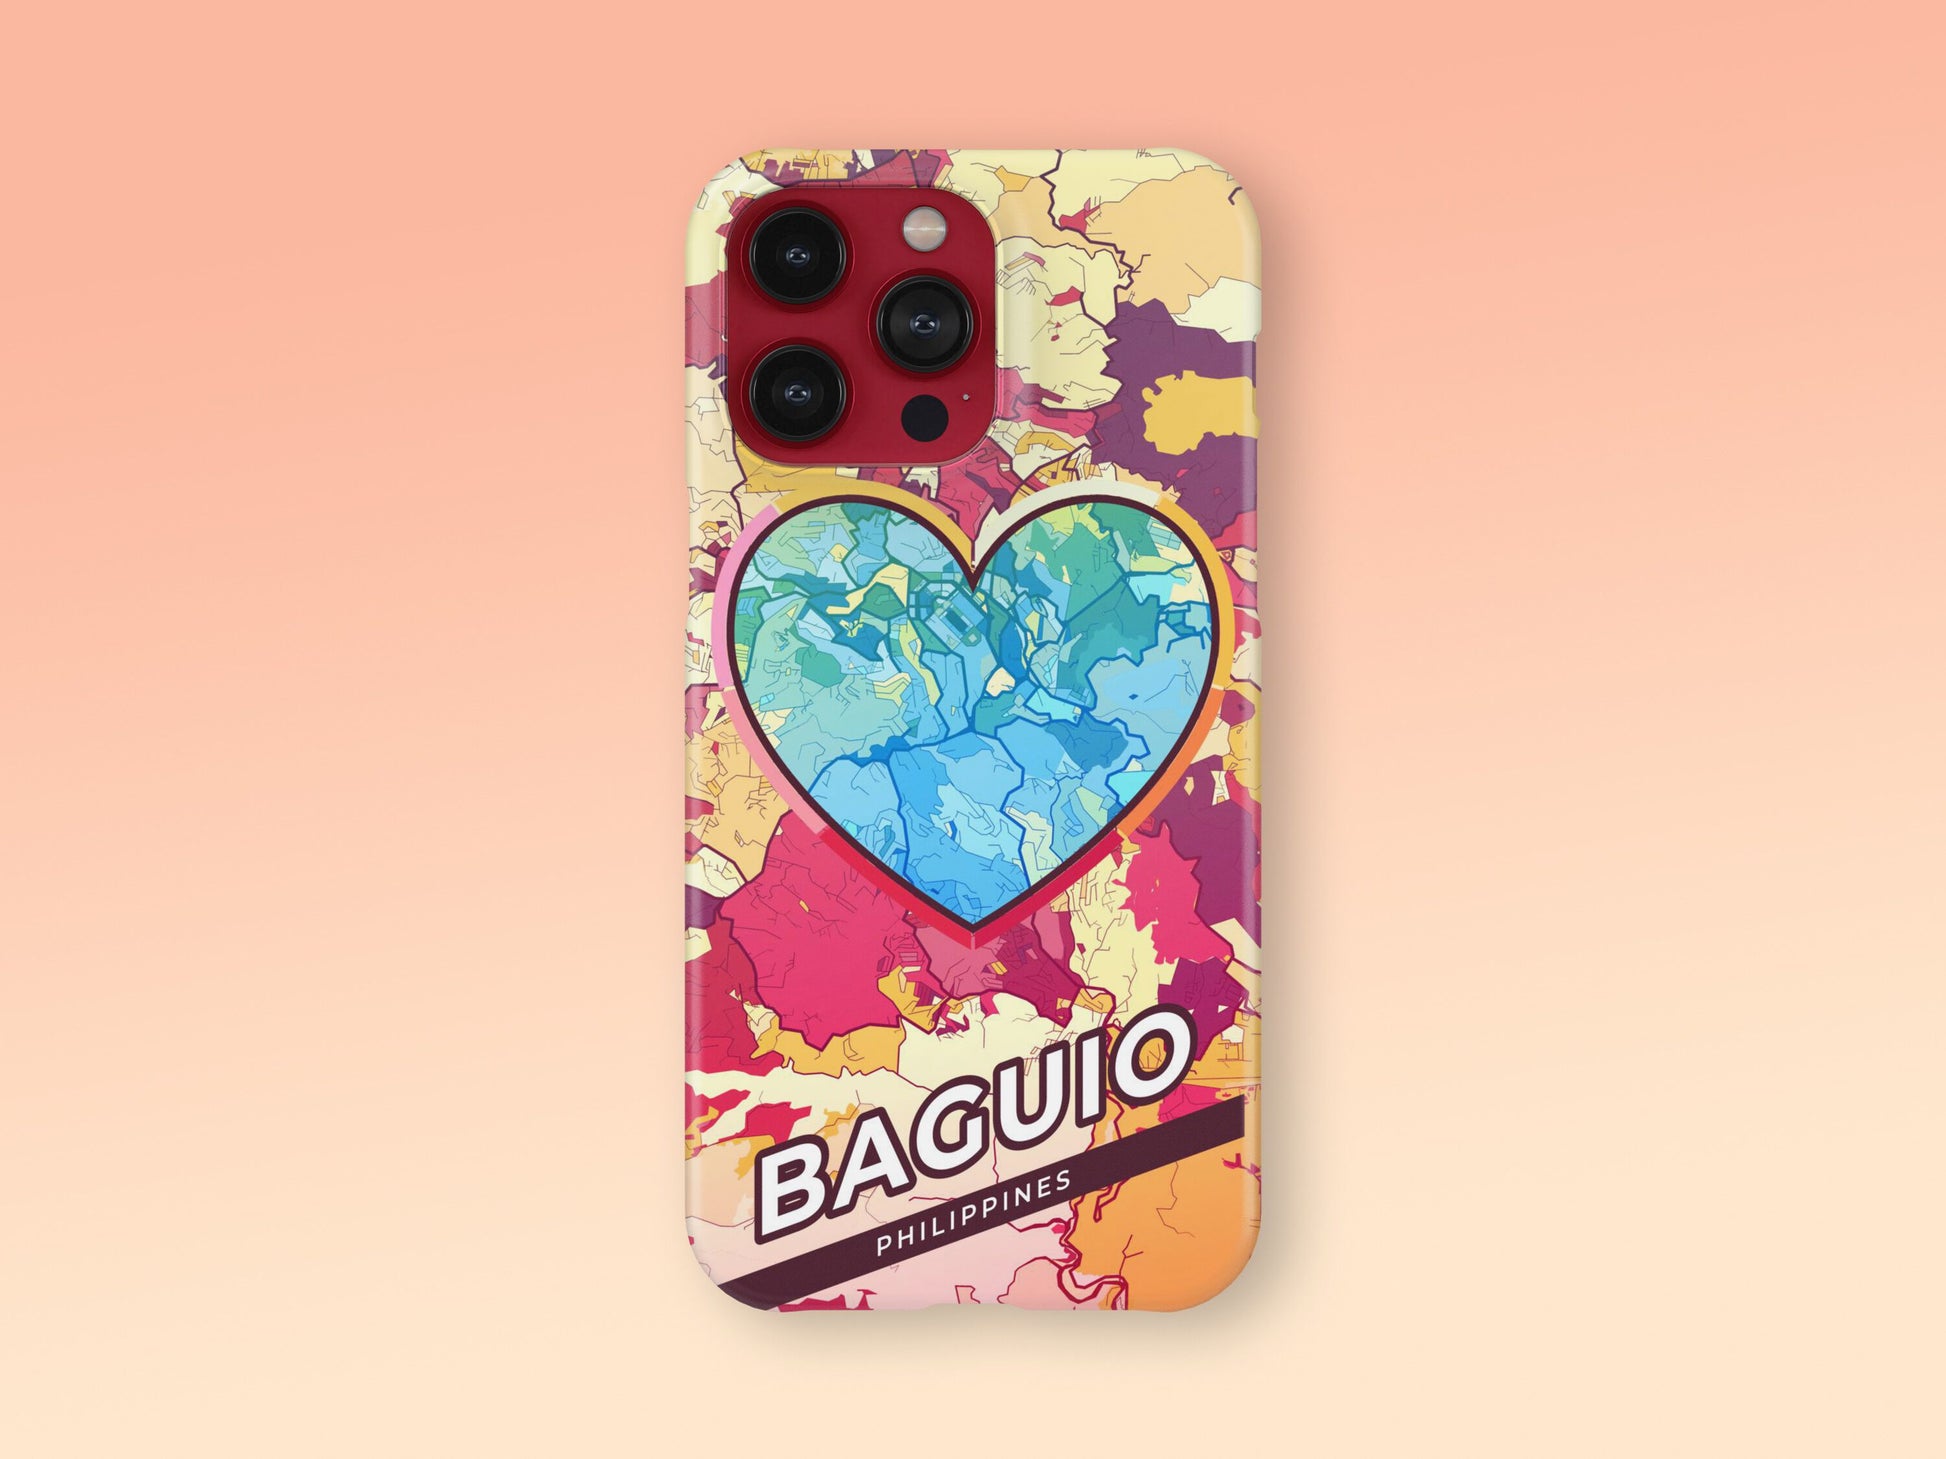 Baguio Philippines slim phone case with colorful icon. Birthday, wedding or housewarming gift. Couple match cases. 2